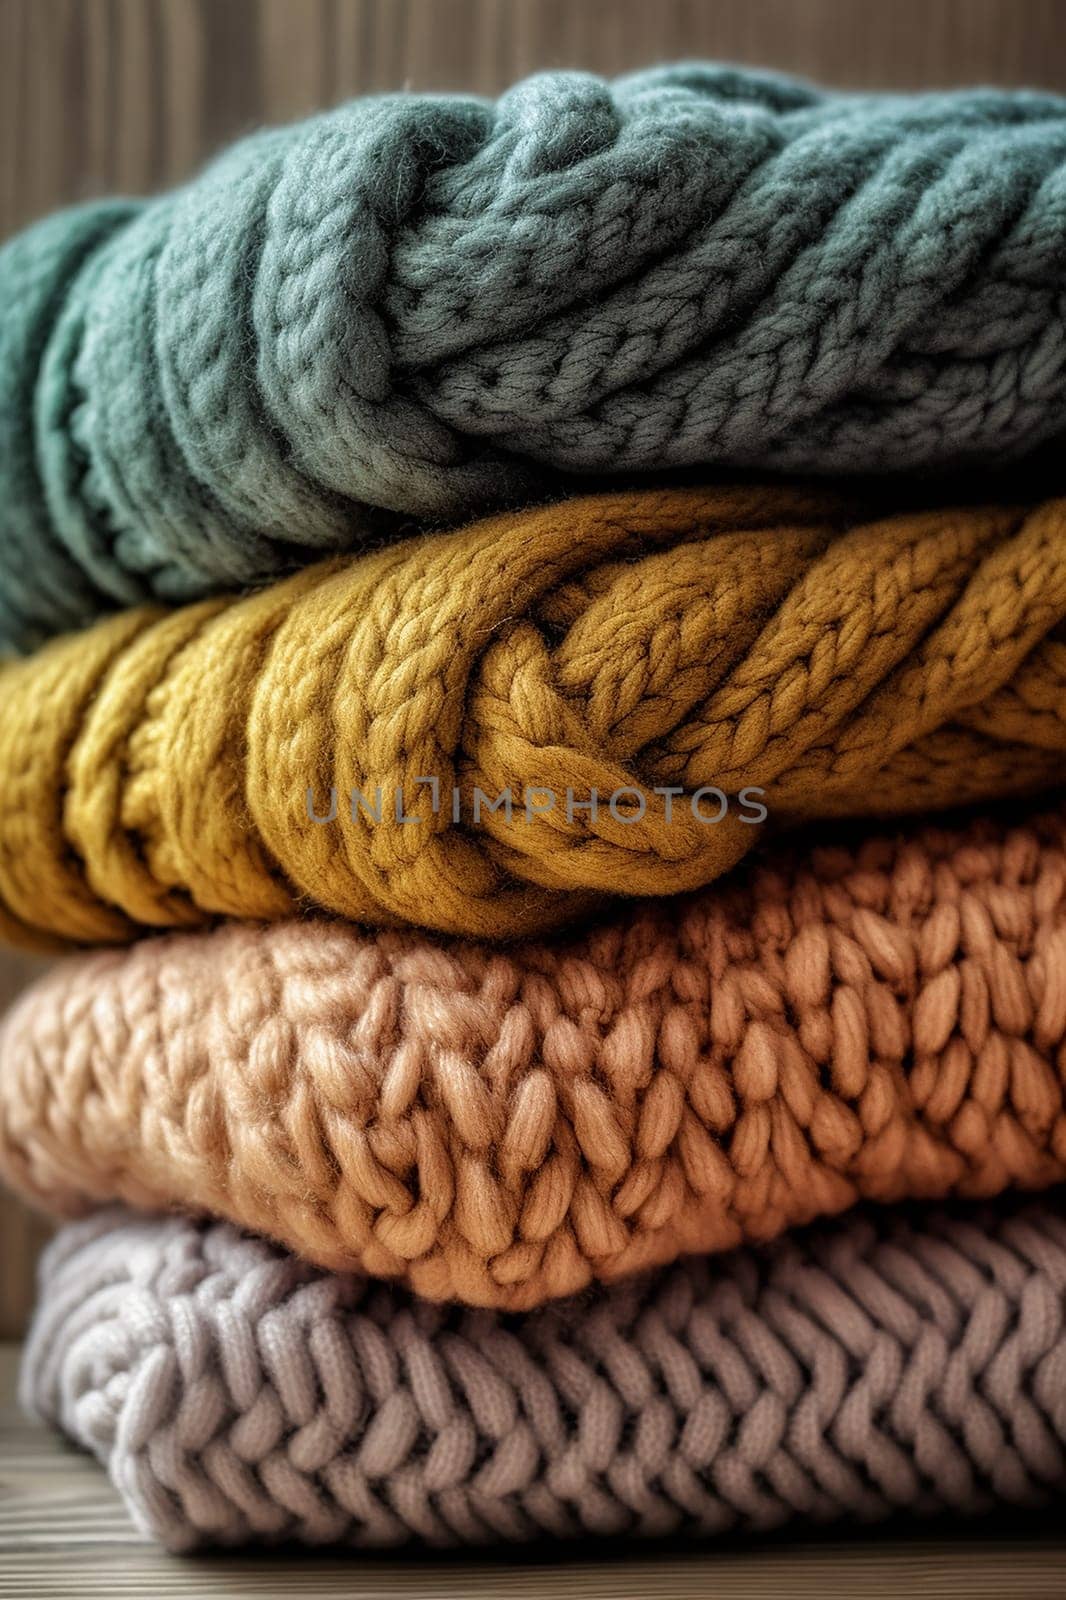 Stack of colorful knitted sweaters neatly folded.